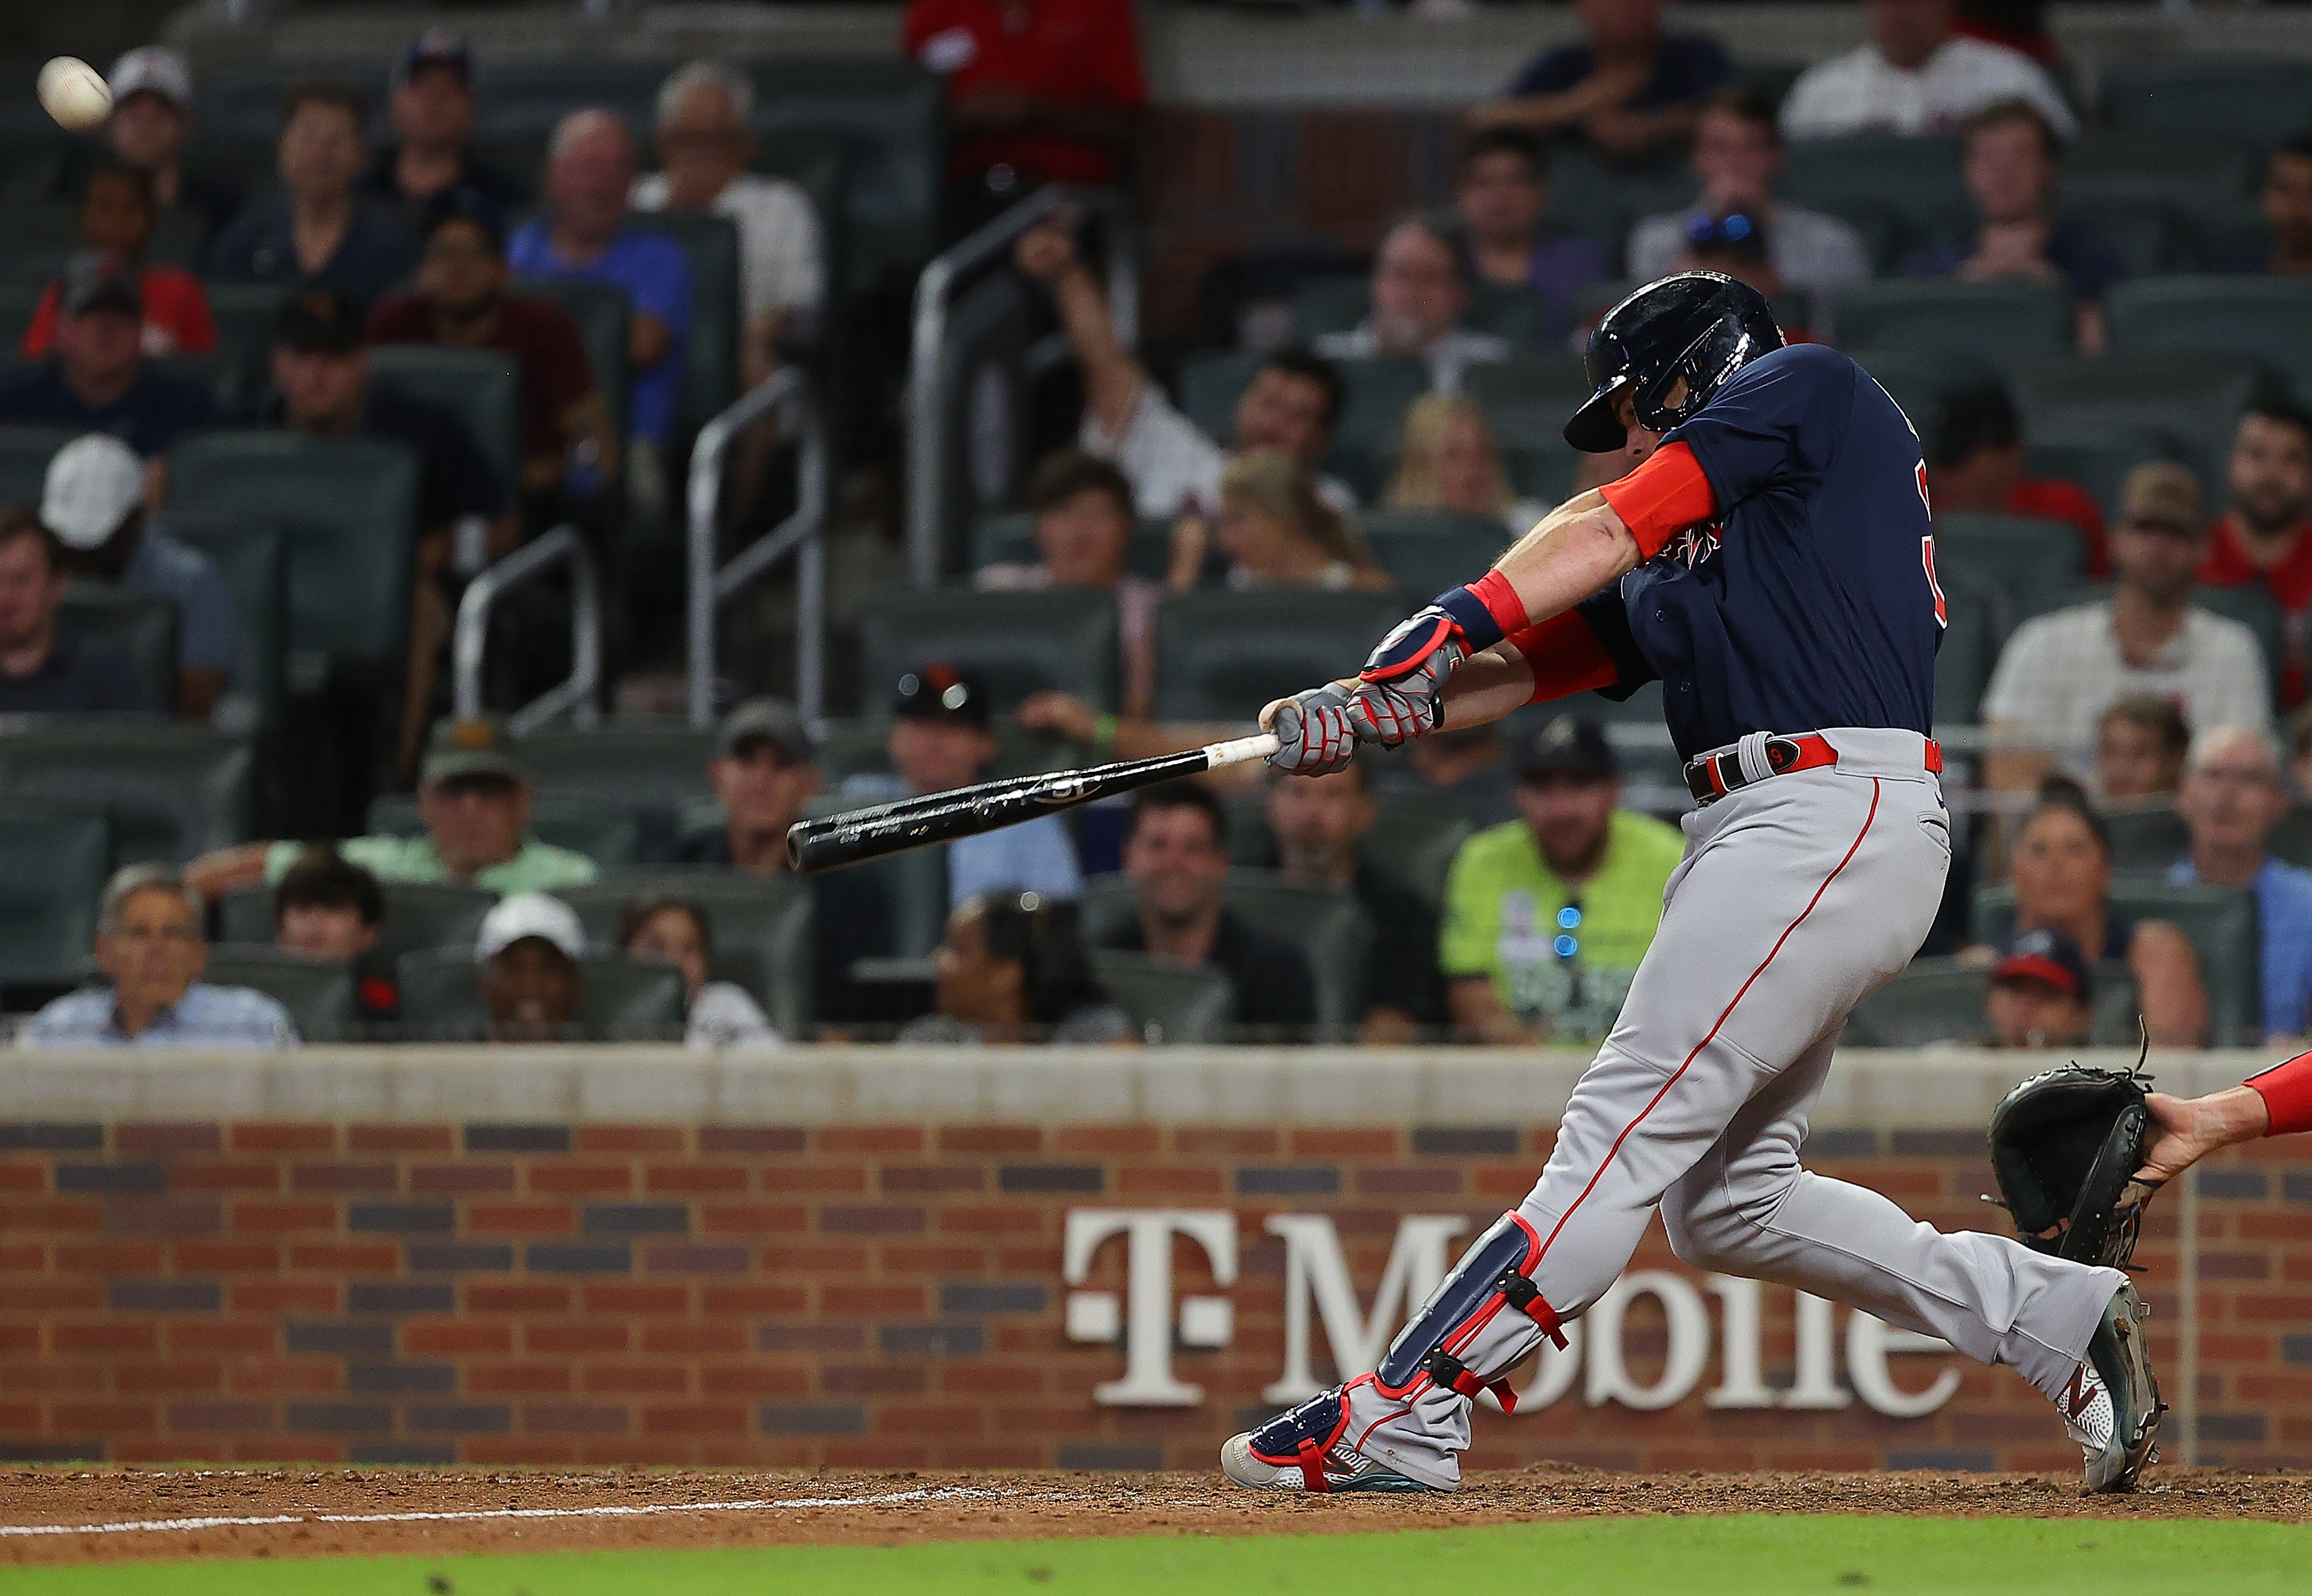 Red Sox complete comeback to defeat Braves